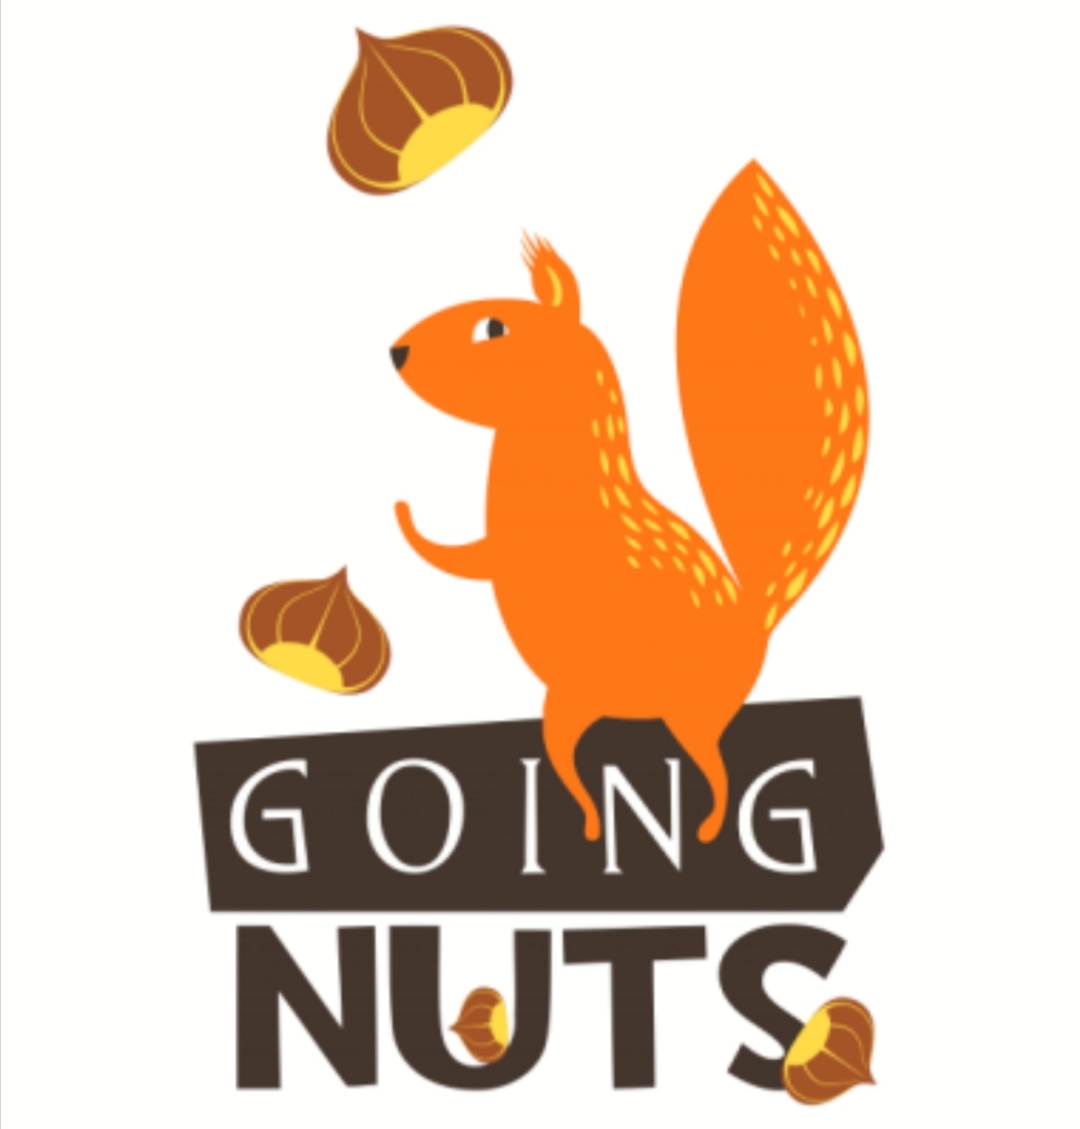 Nut and go перевод с английского. To go Nuts. To go Nuts идиома. Nuts idioms. Going Nuts.